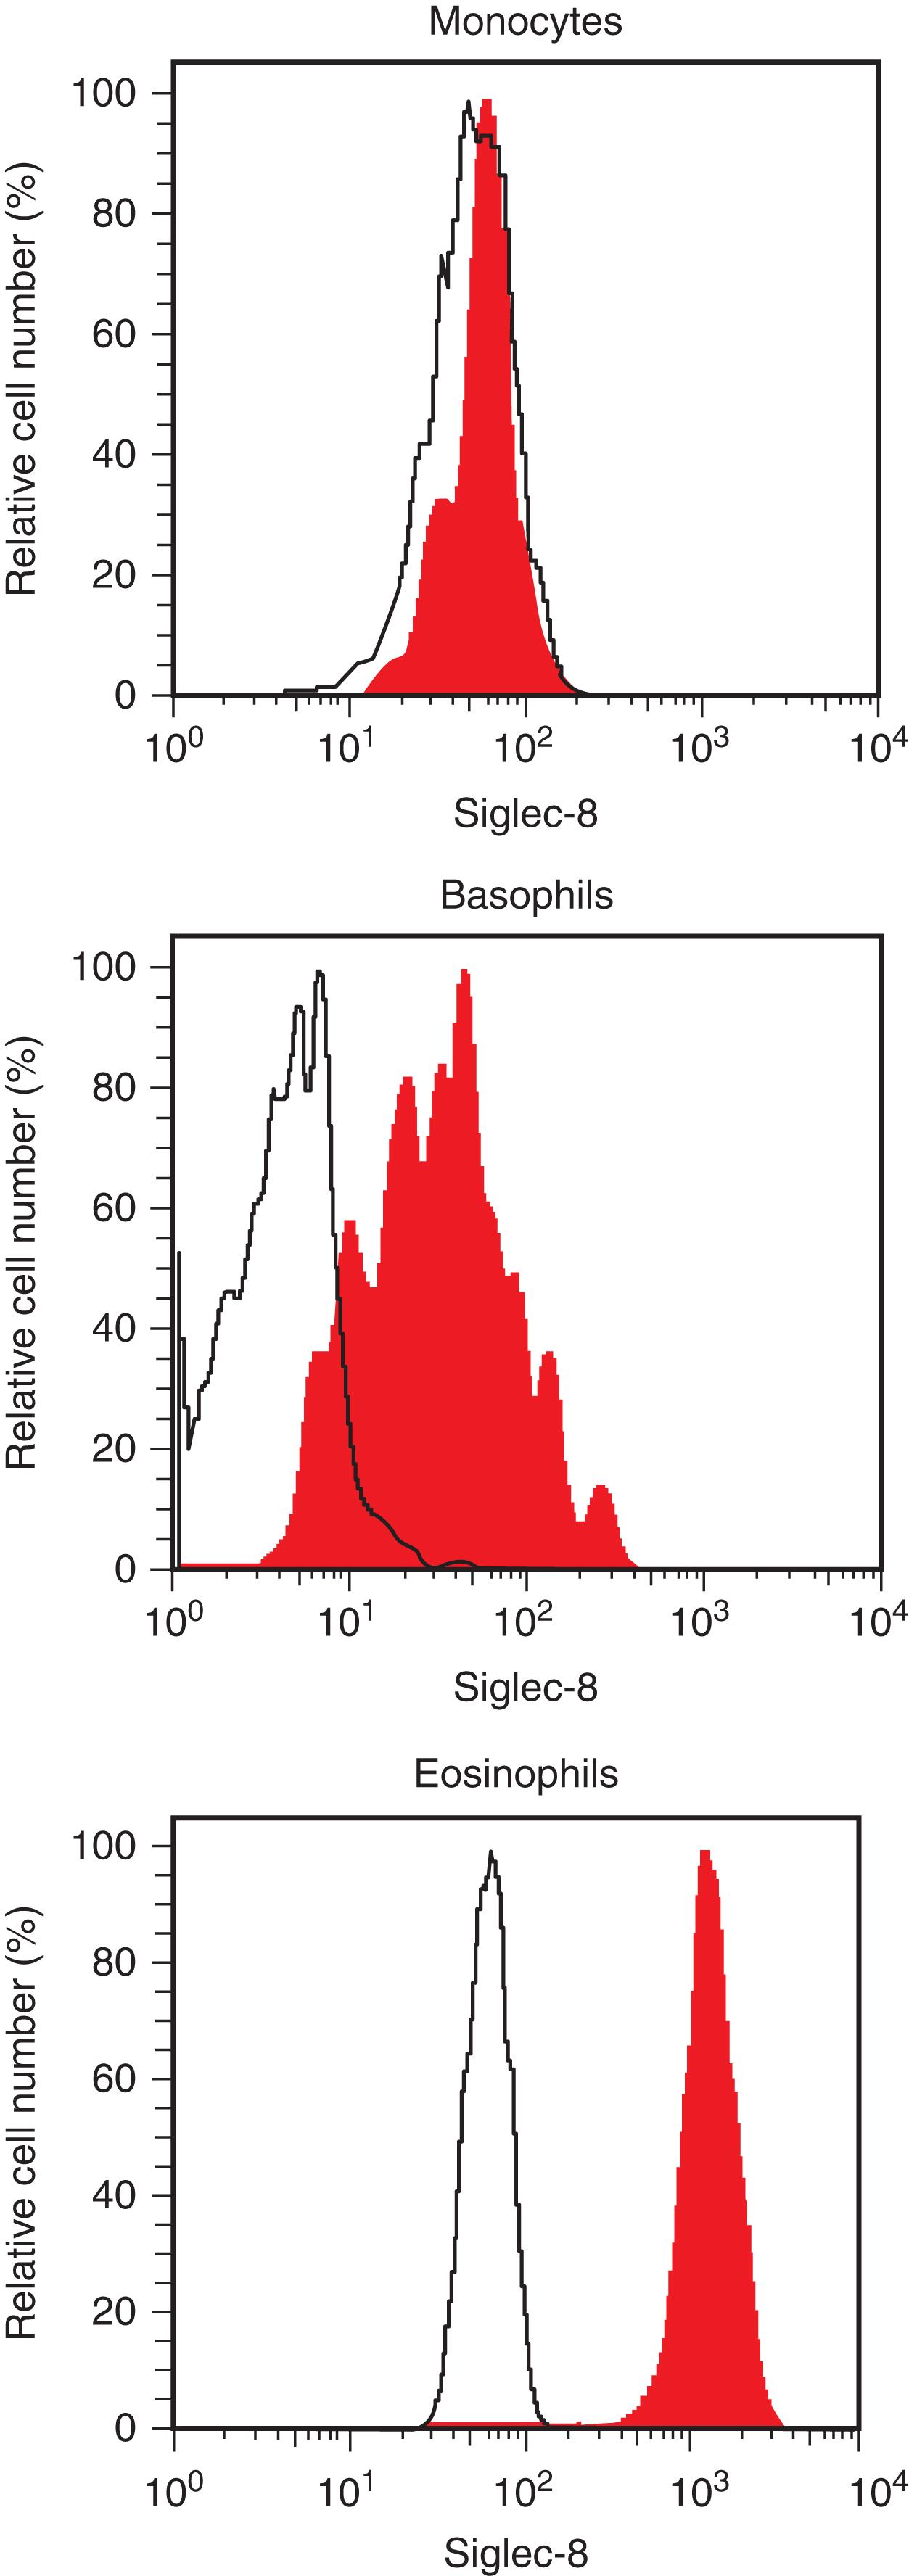 Figure 74.1, EXPRESSION OF SIGLEC-8 ON PERIPHERAL BLOOD EOSINOPHILS.